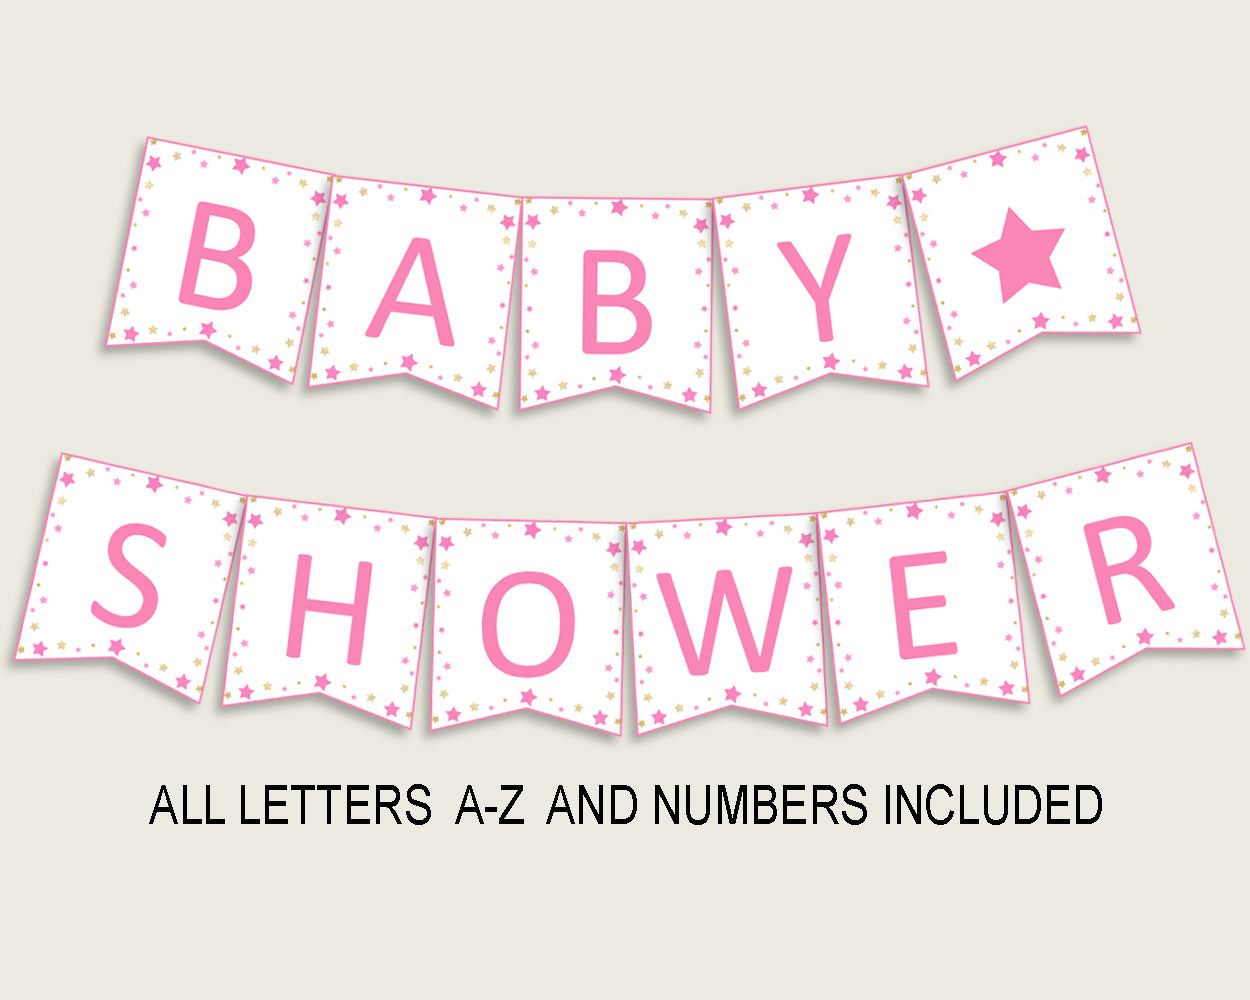 Twinkle Star Baby Shower Banner All Letters, Birthday Party Banner Printable A-Z, Pink Gold Banner Decoration Letters Girl, Cute Stars bsg01